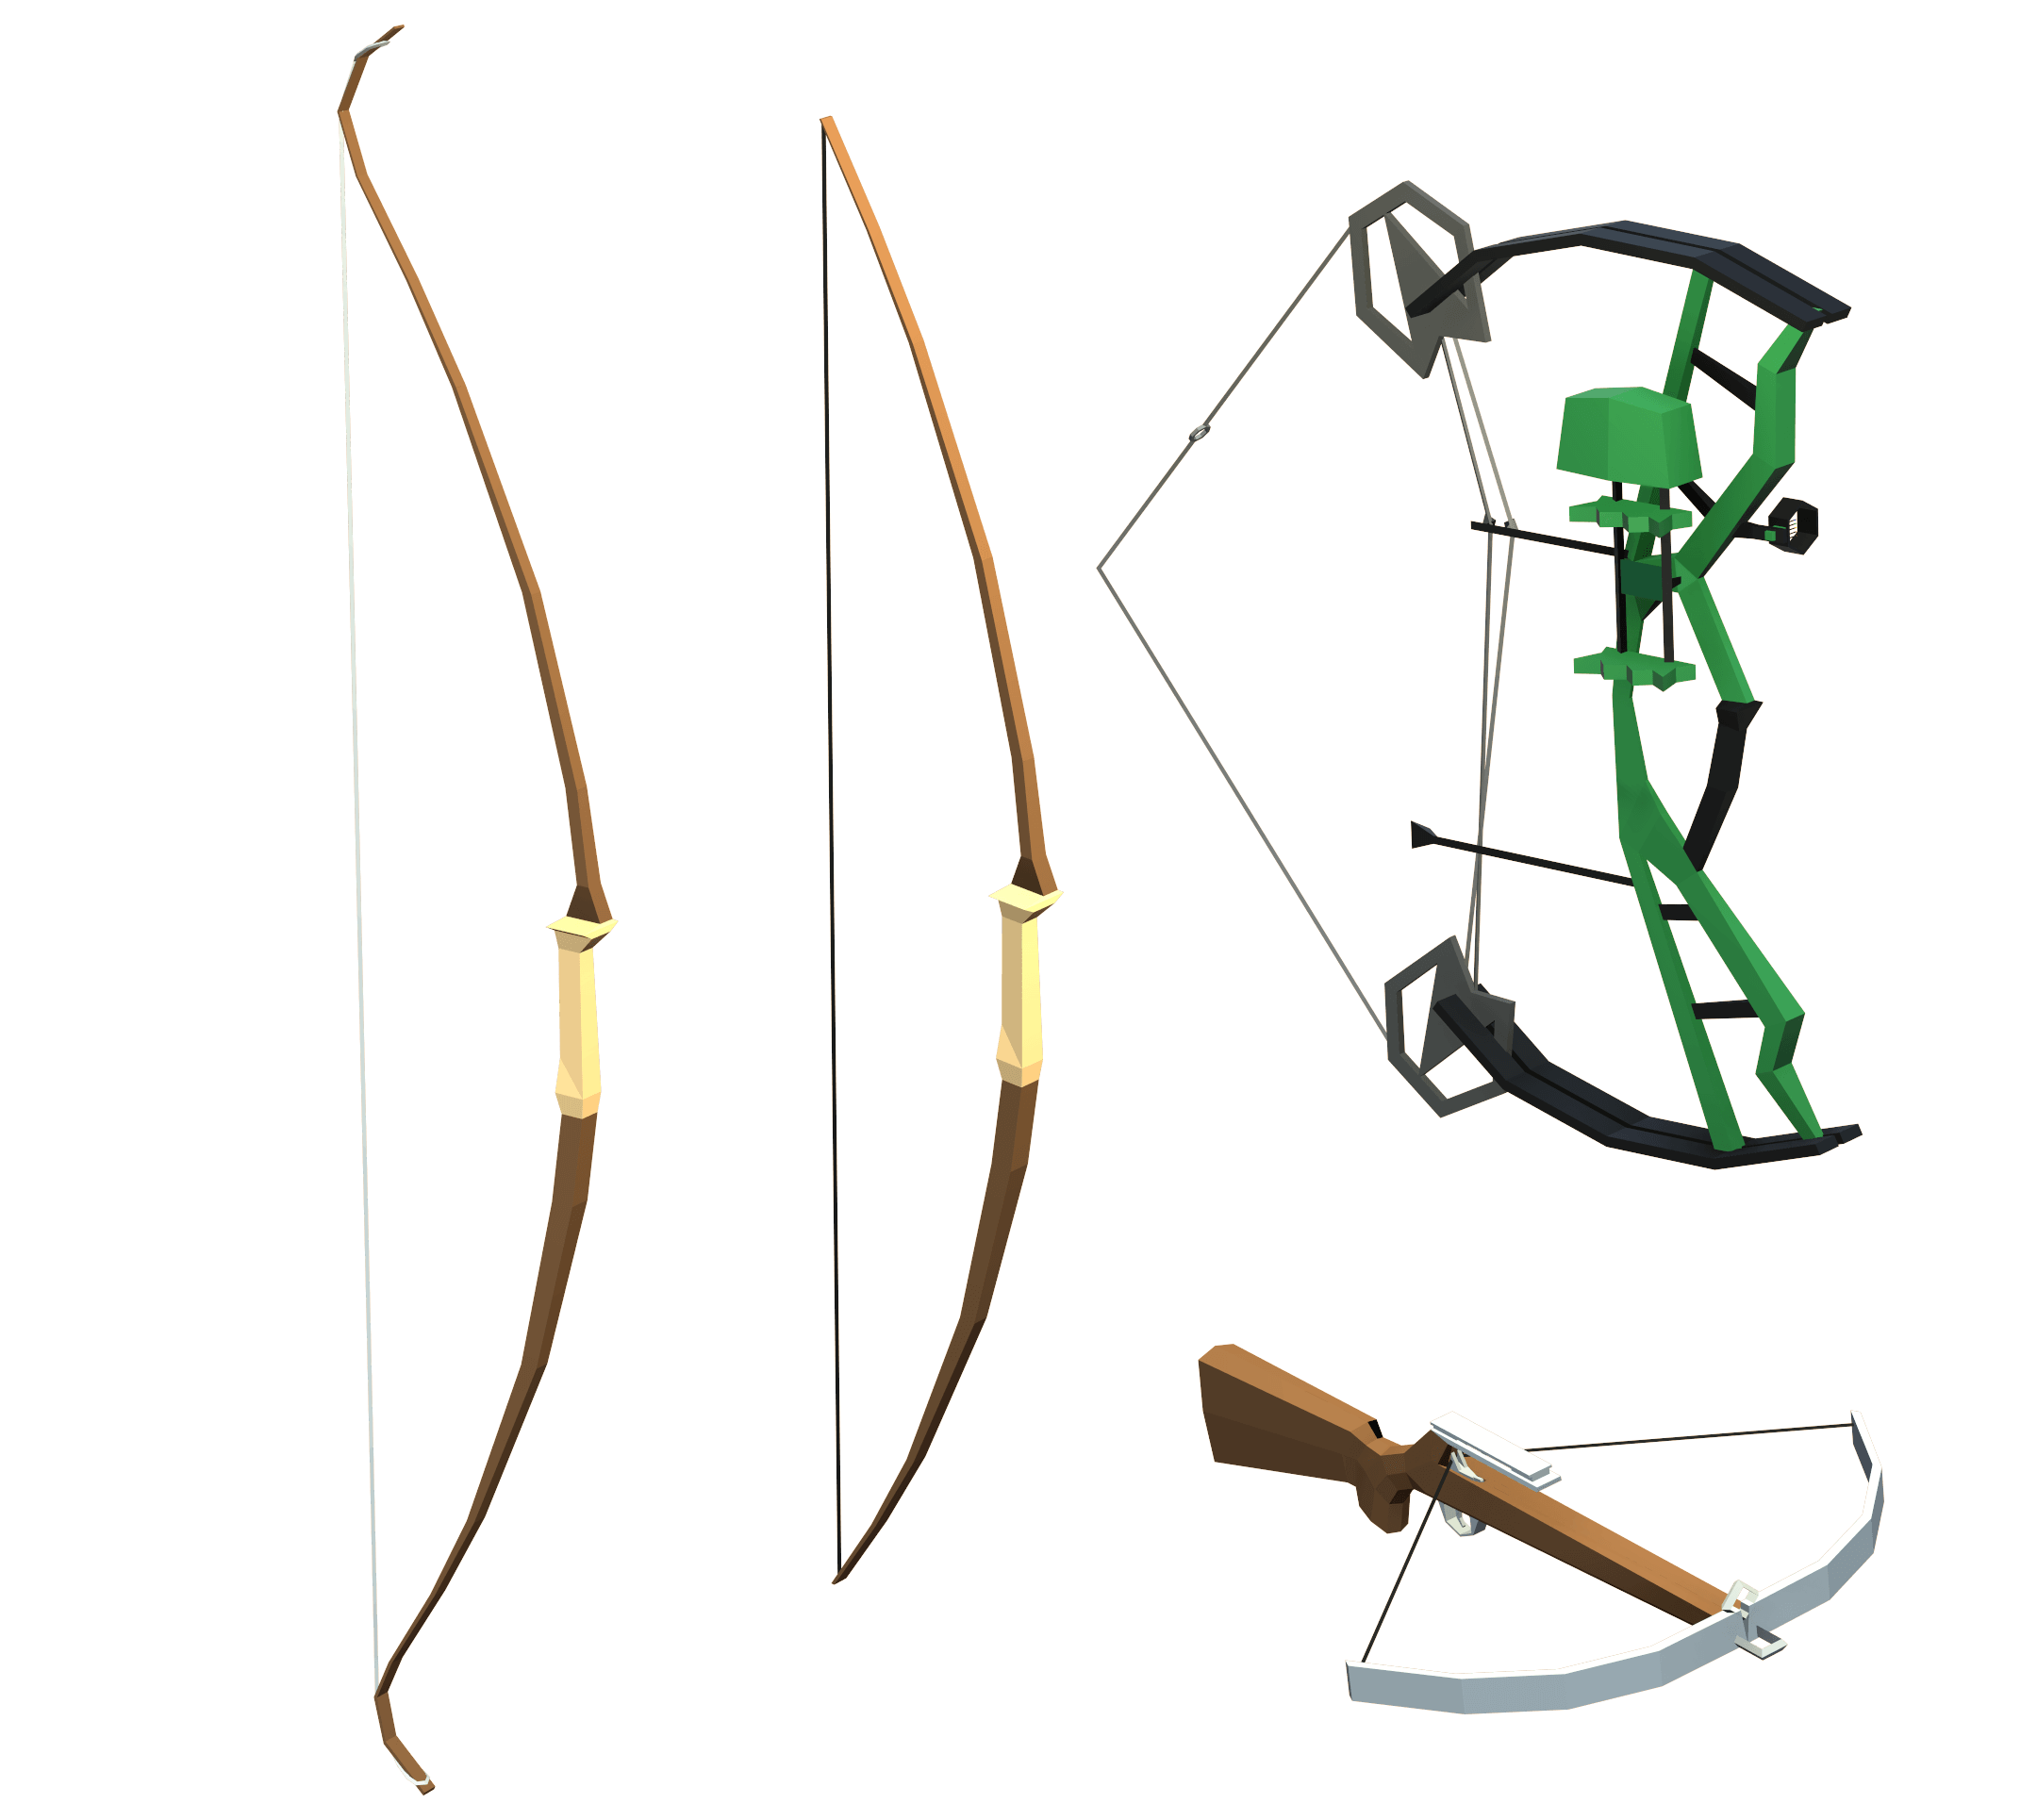 What are the three common bow types?